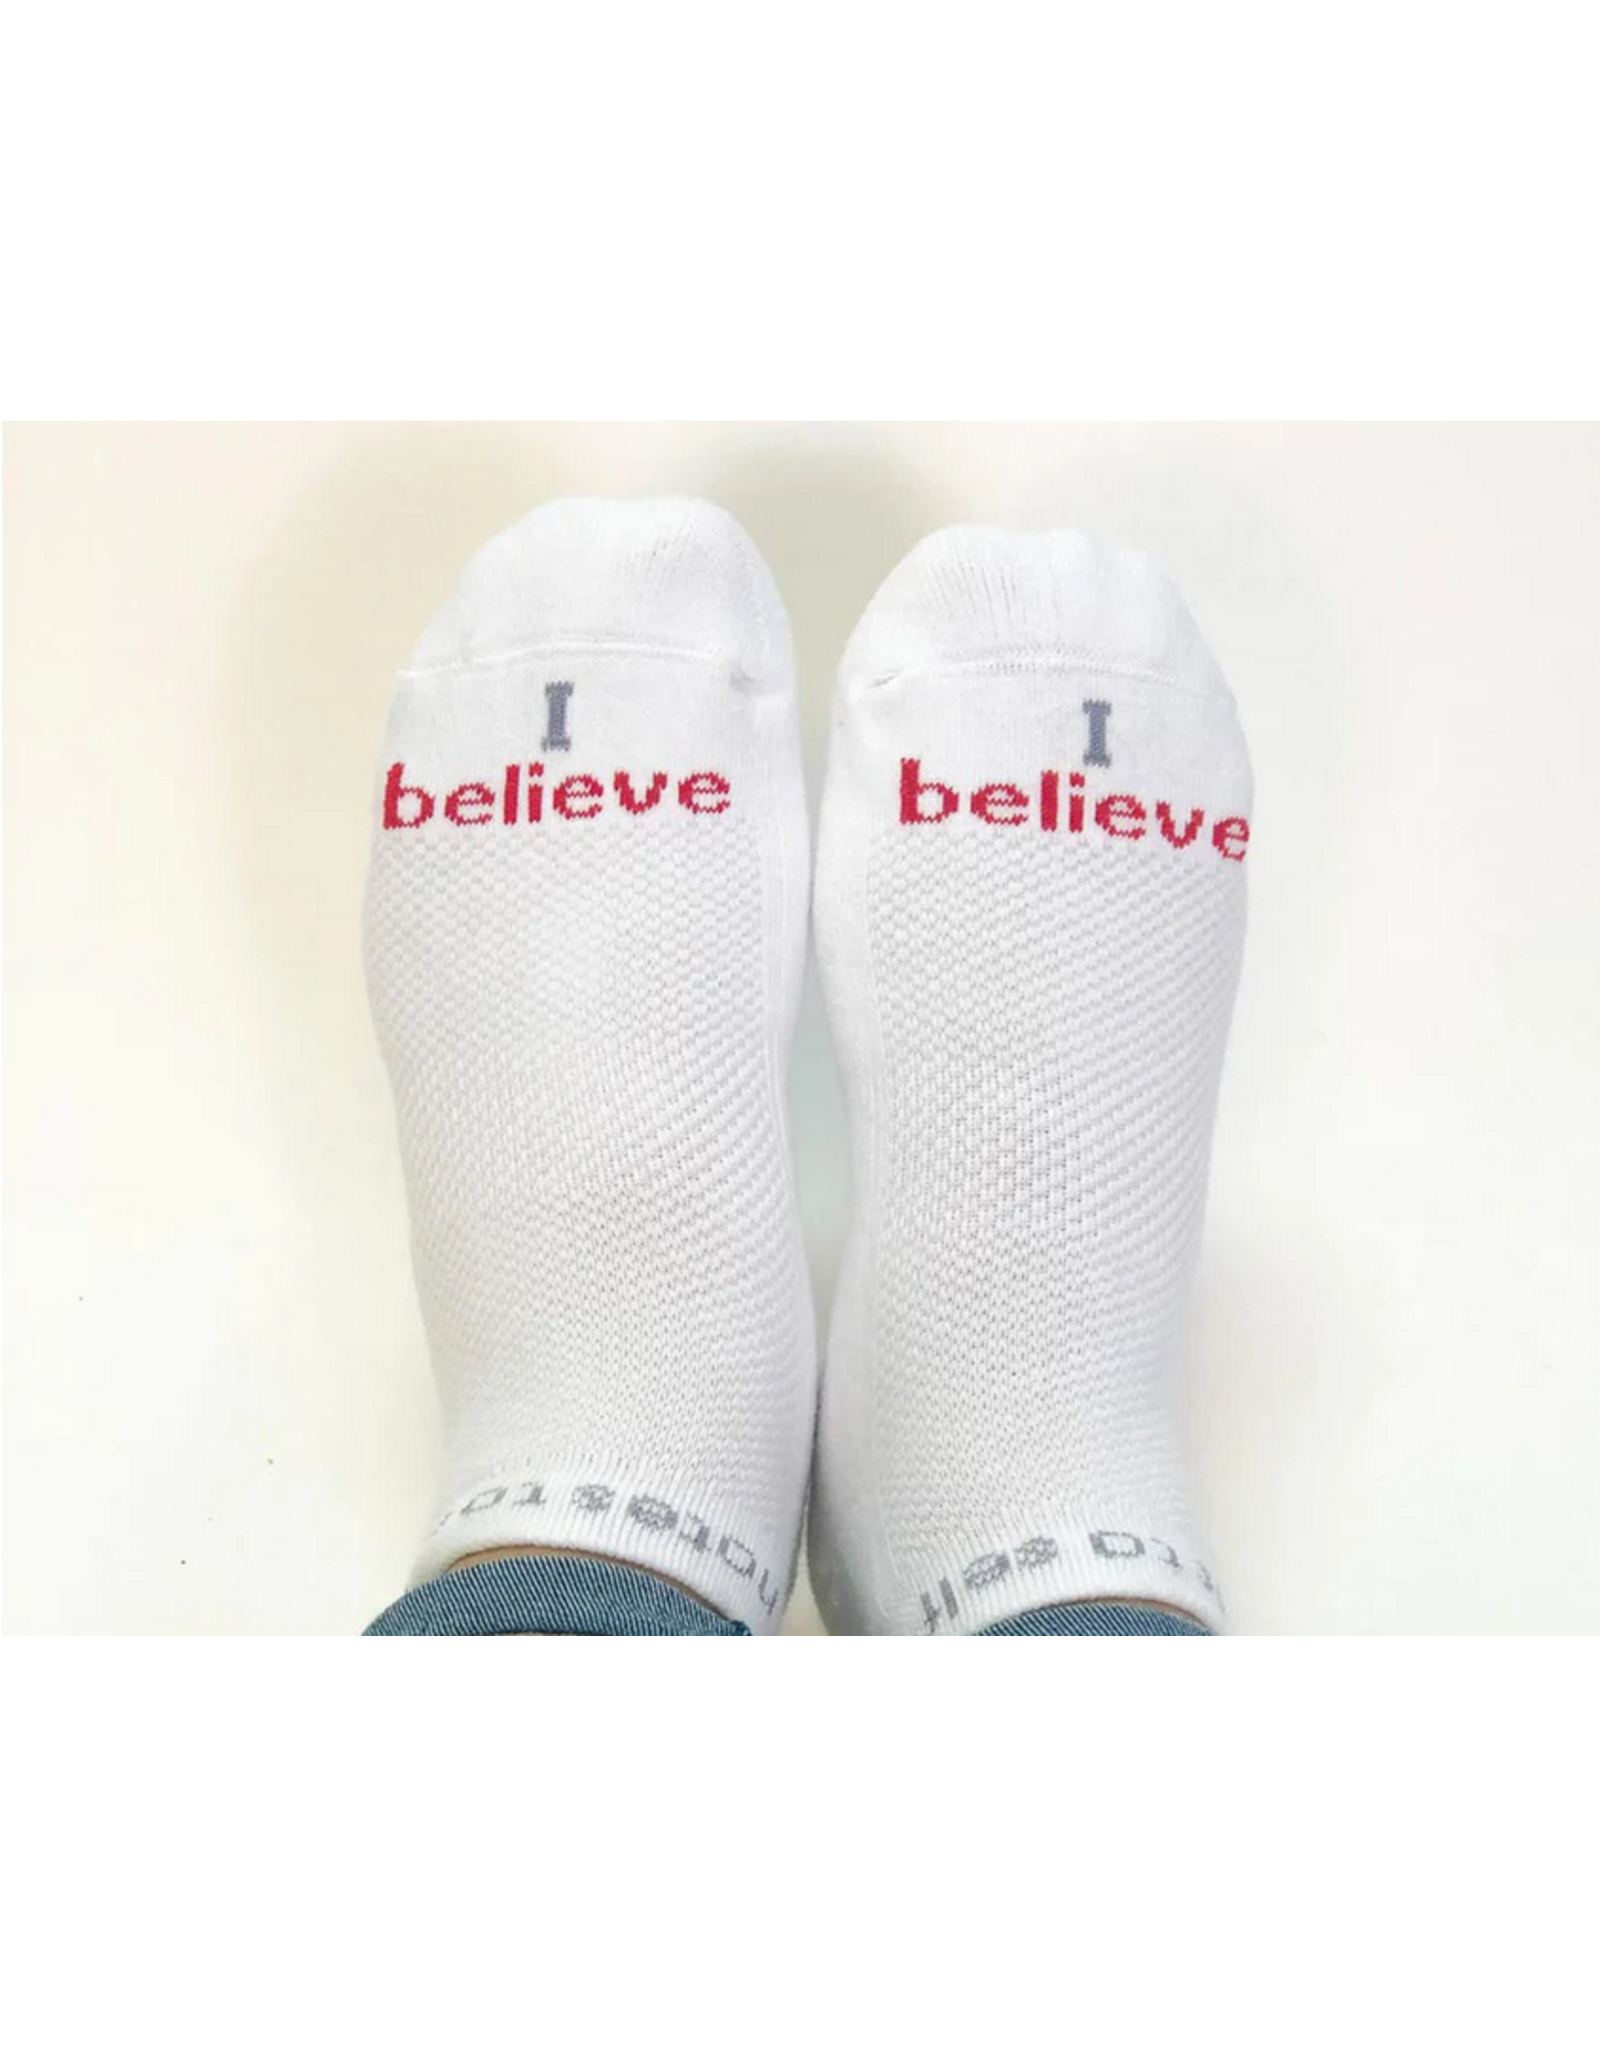 notes to self Notes to Self BELIEVE 'I believe' Low-Cut Socks